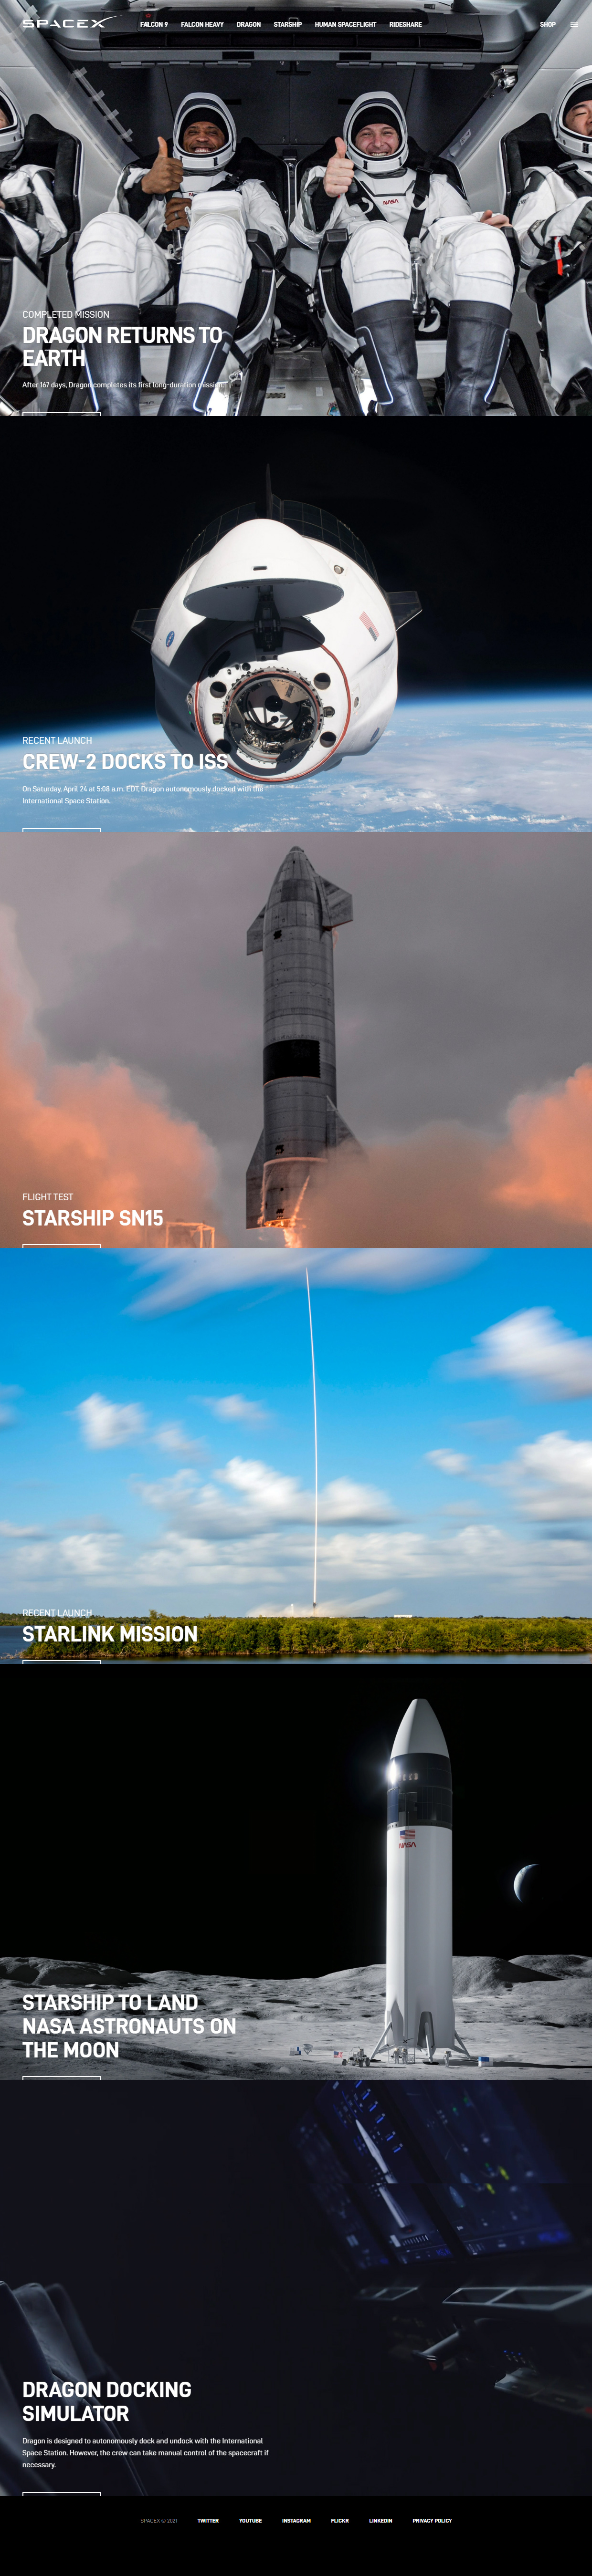 SpaceX website in 2021